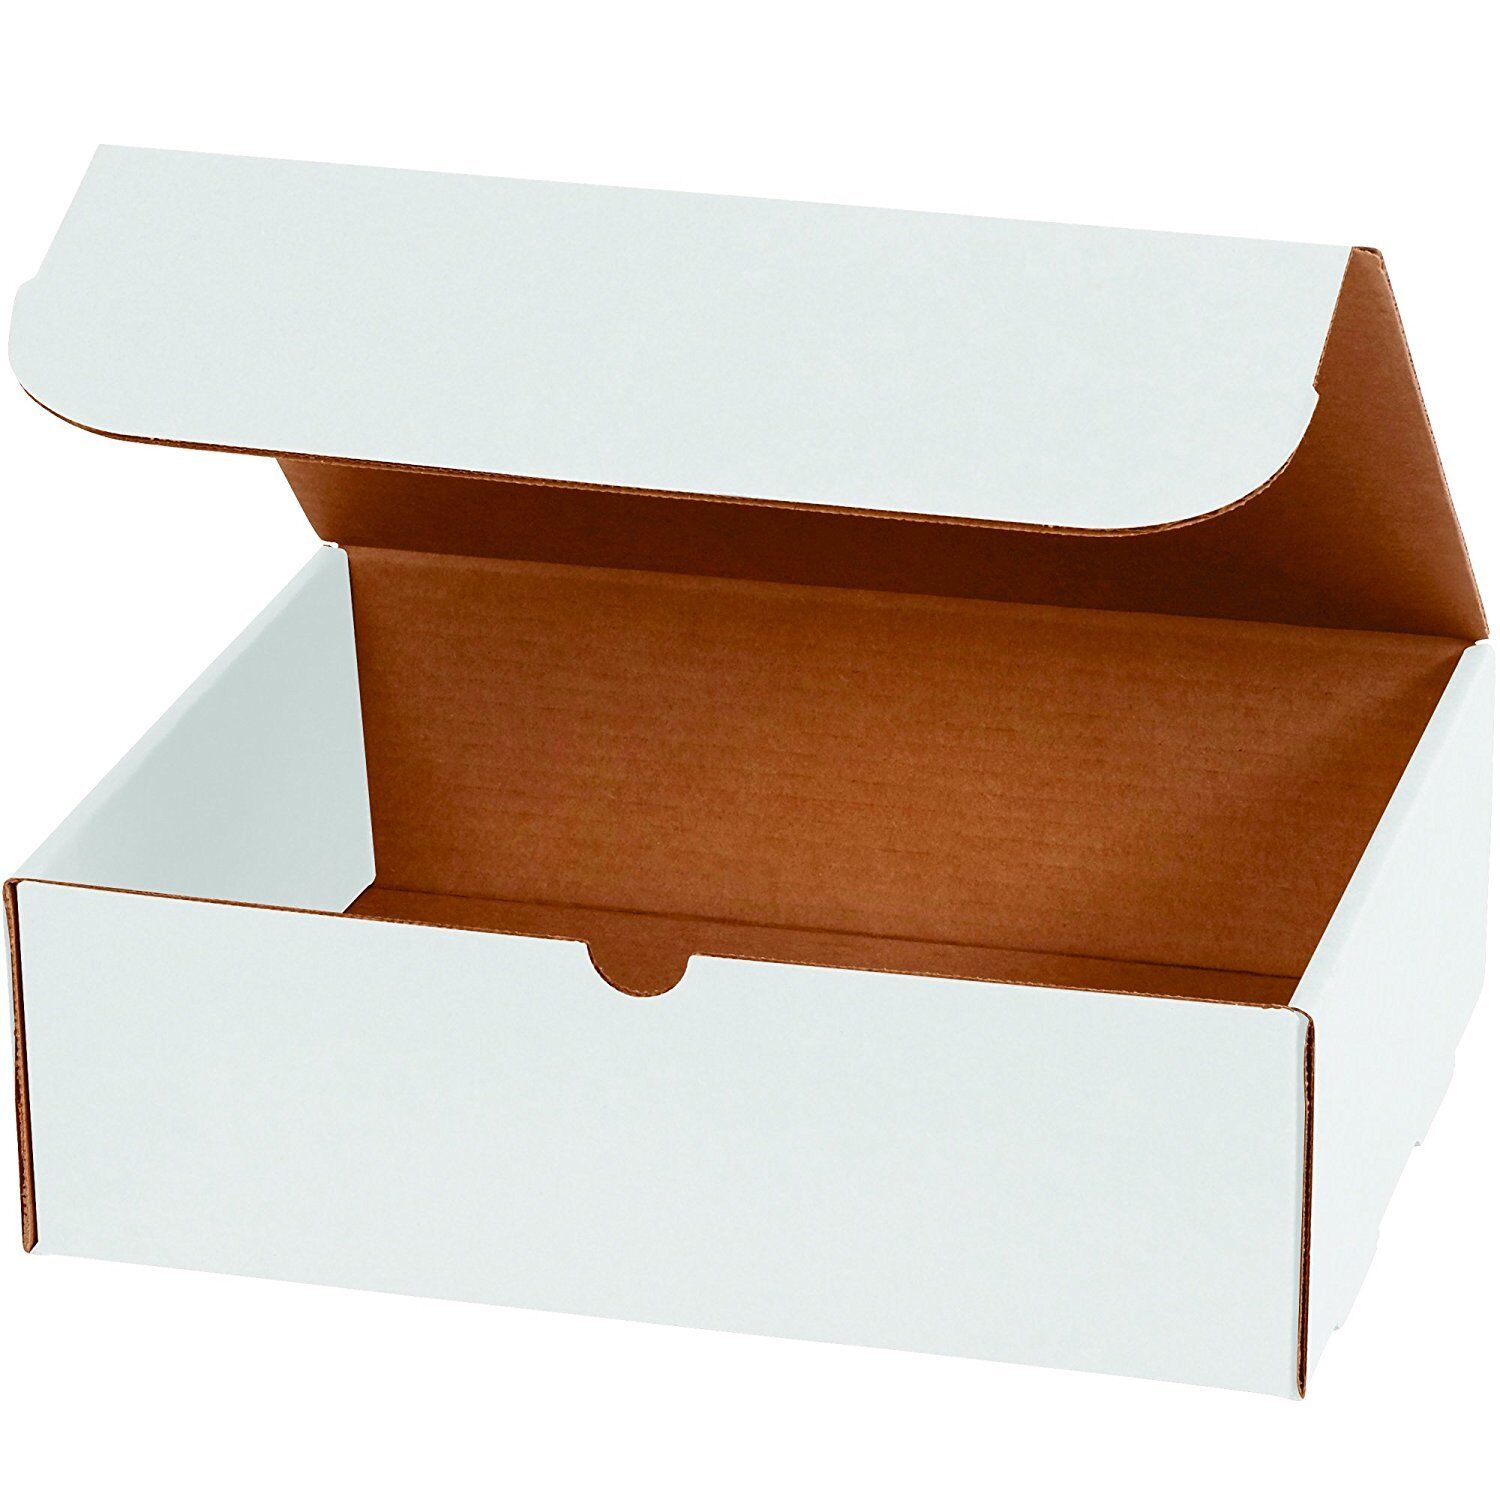 8x6x4 White Corrugated Shipping Mailers Packing Box Boxes Folding 100 To 1000